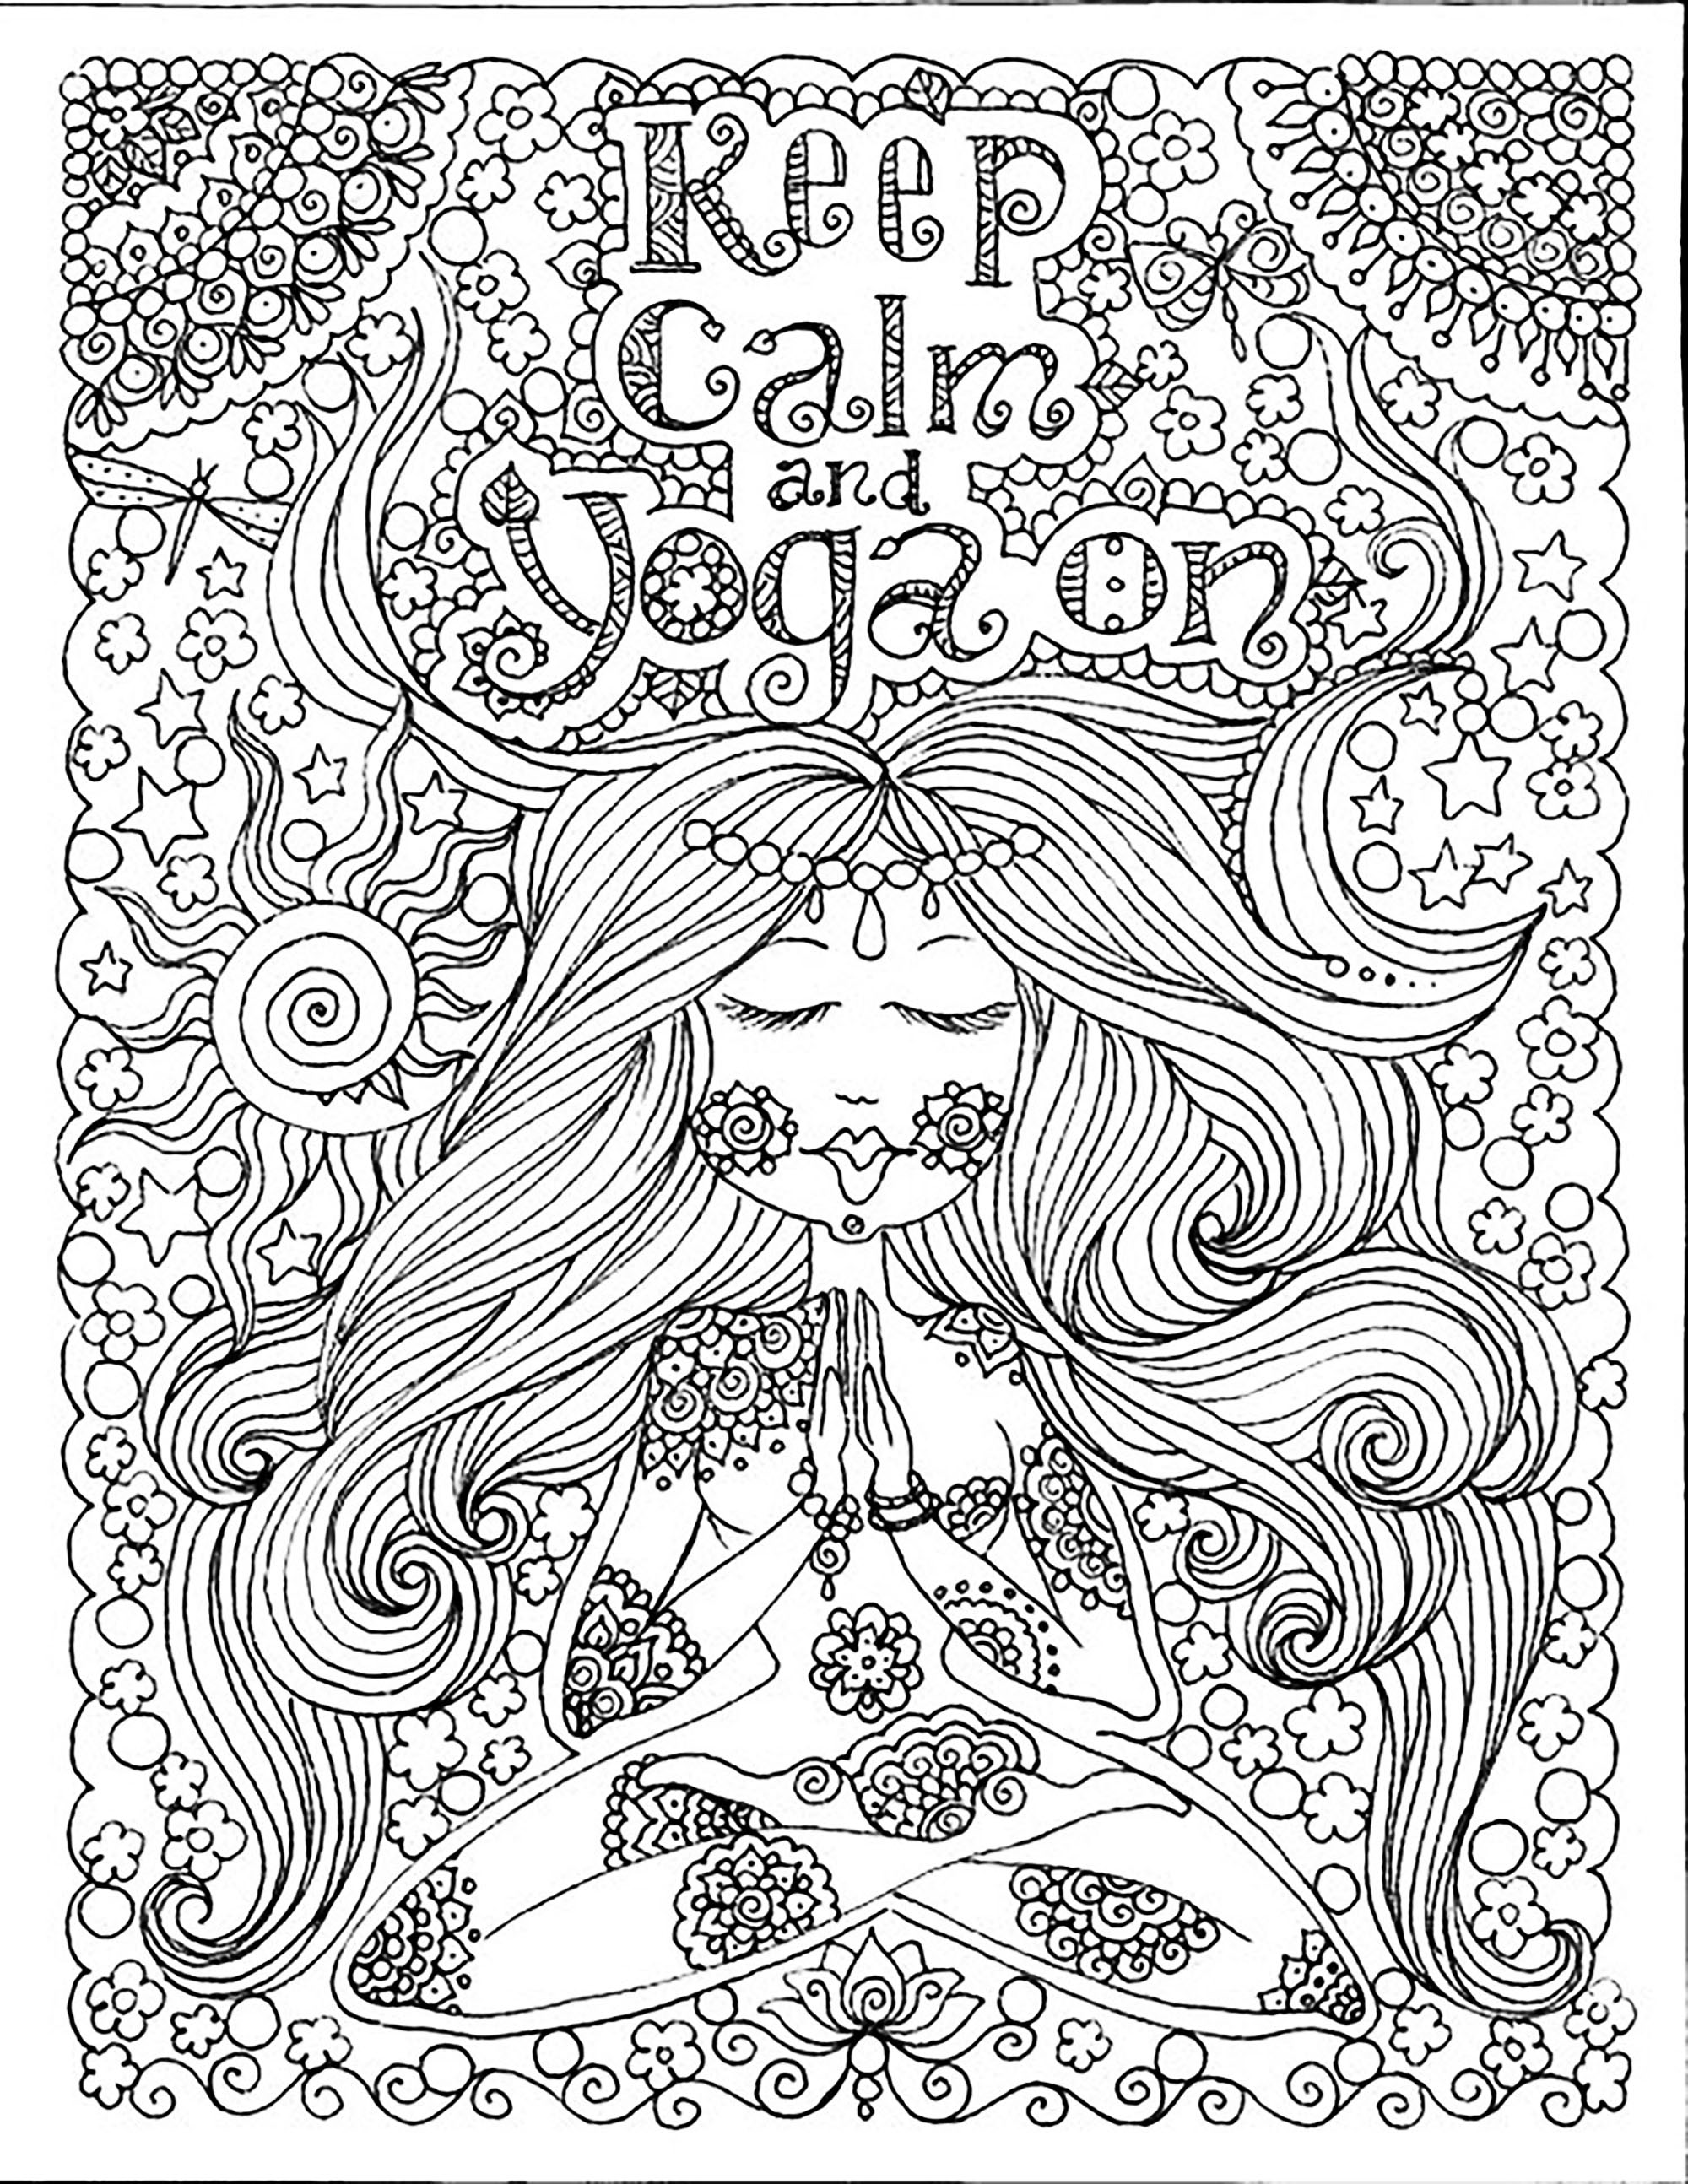 Download Keep calm and do yoga - Anti stress Adult Coloring Pages